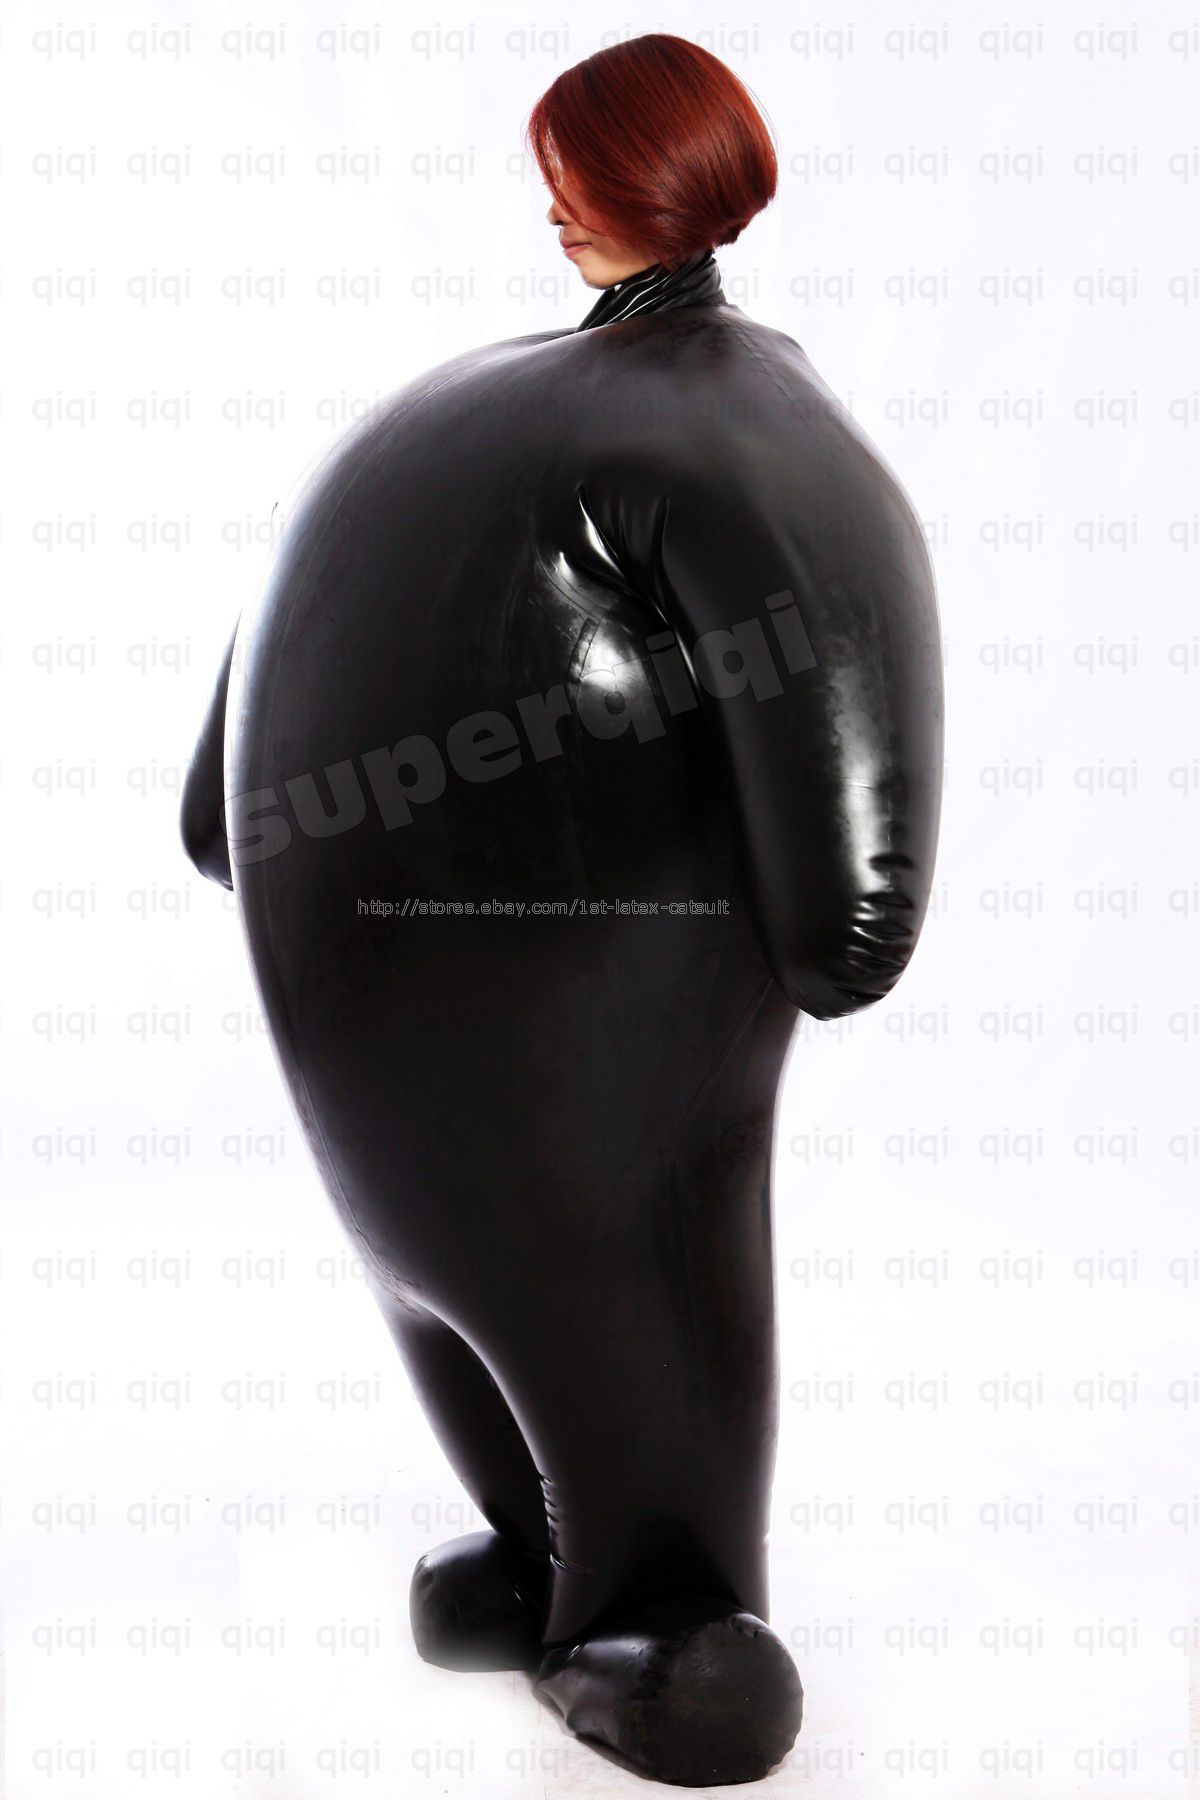 Latex Rubber Gummi 0 45mm Inflatable Catsuit Ball Mask Hood Suit Unique Clothing Ebay